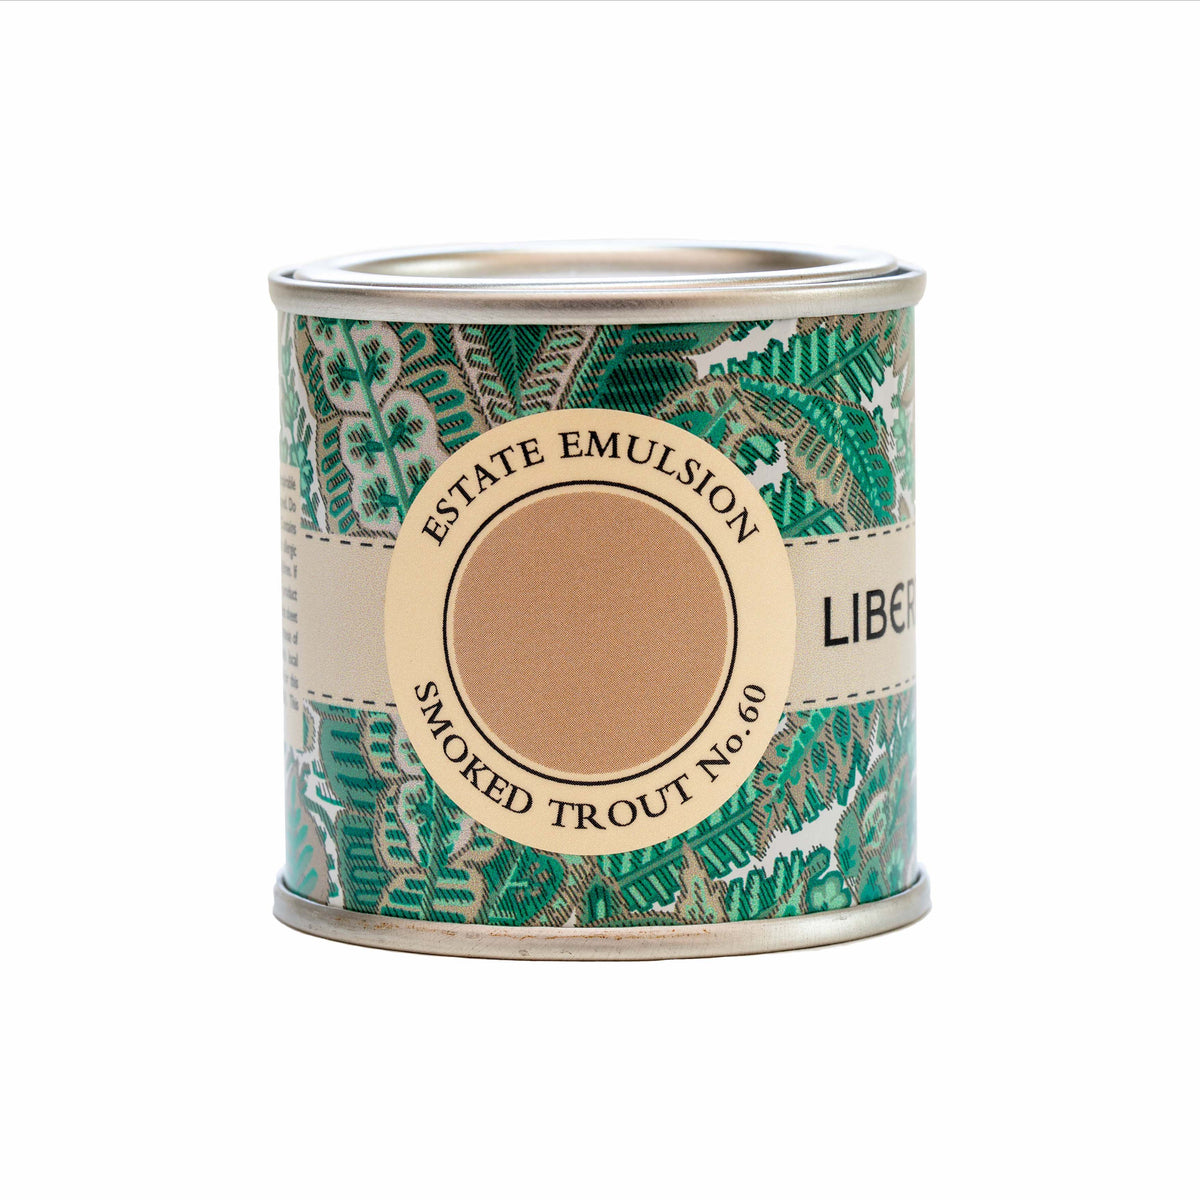 Liberty Collection: Smoked Trout No. 60